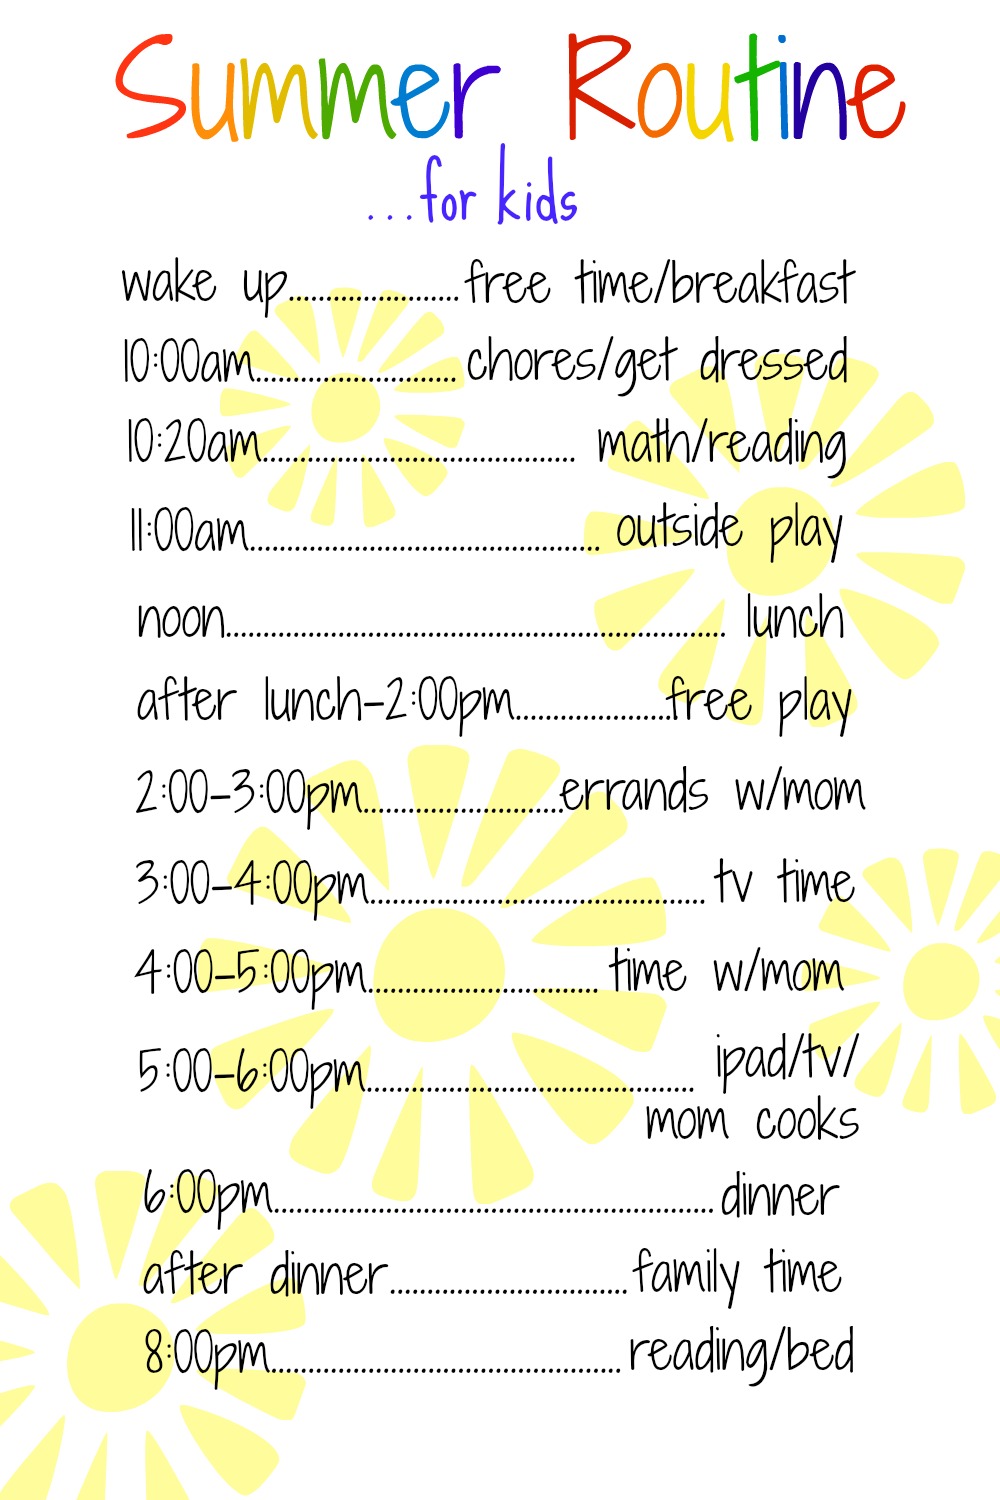 make a daily schedule for kids